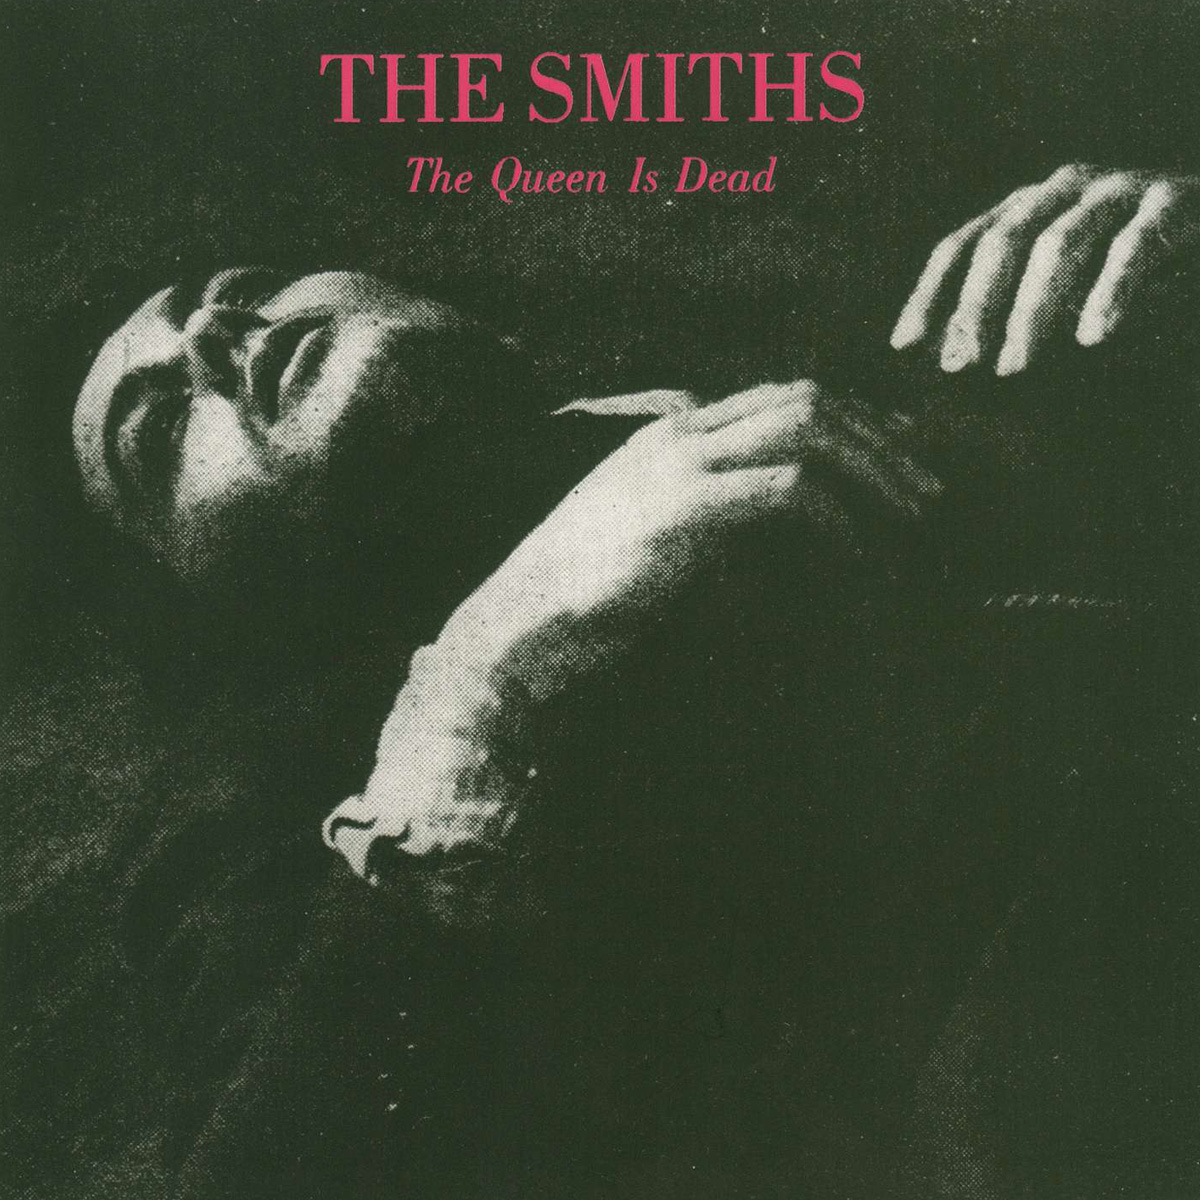 The Queen is Dead 音樂專輯 – The Smiths